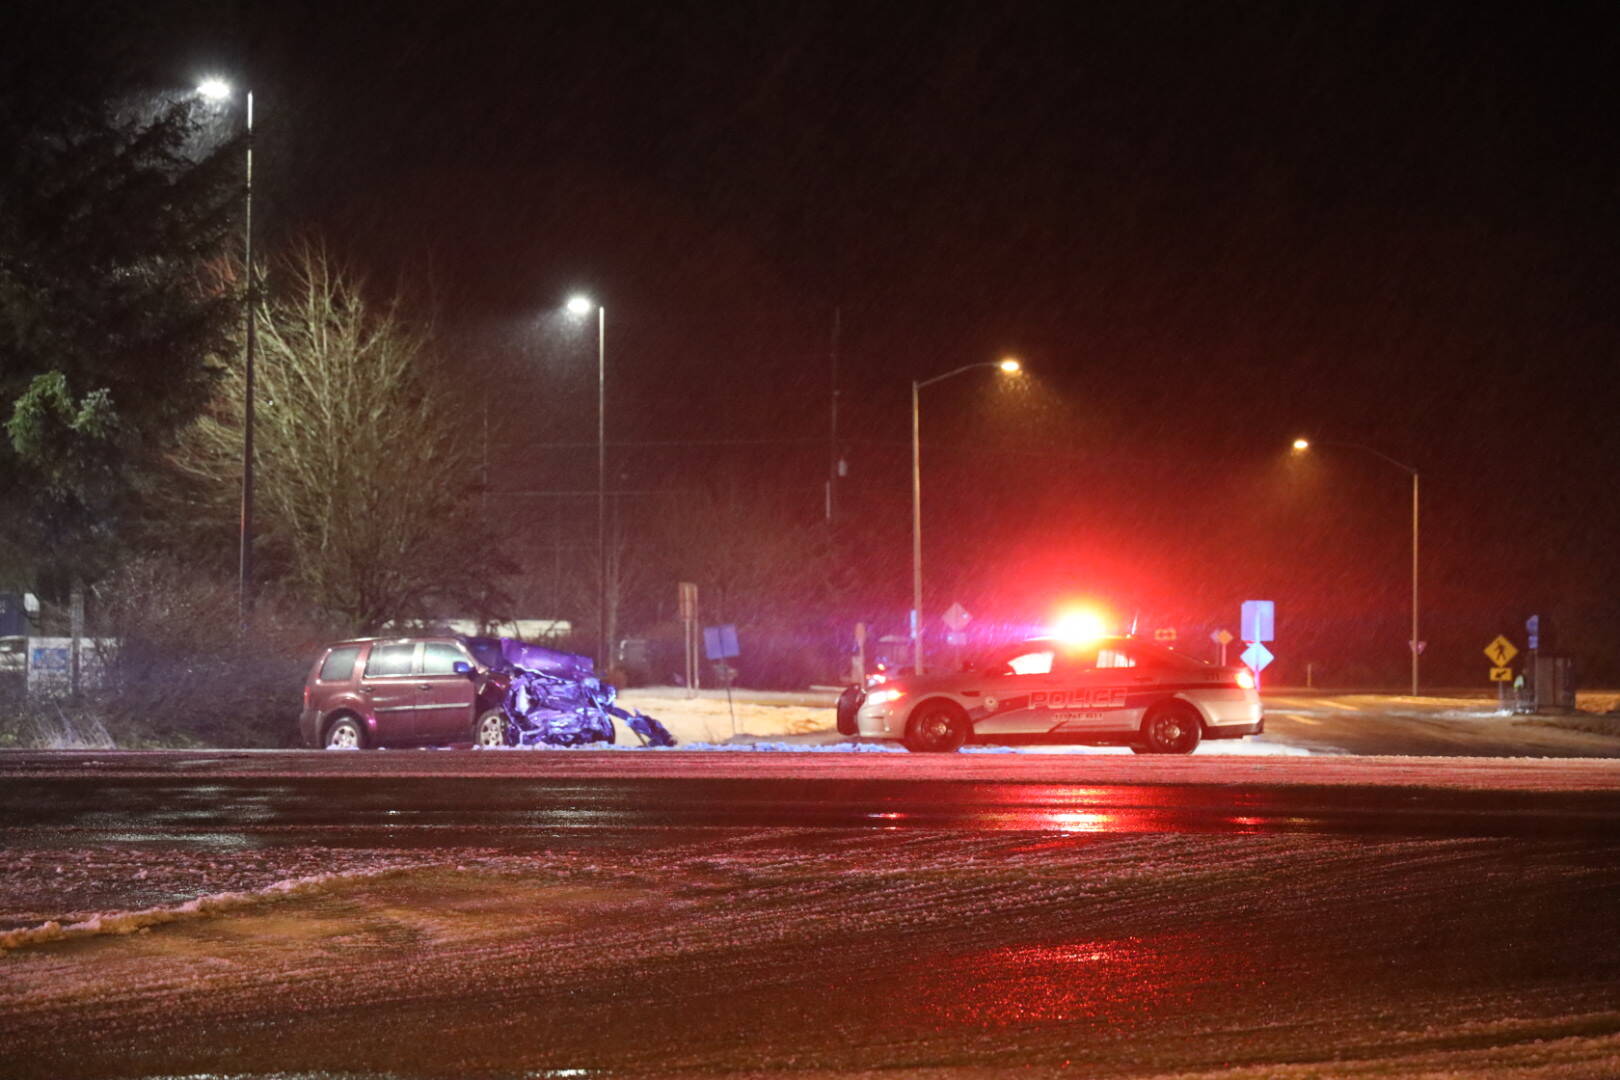 Juneau Police Department at the scene of a motor vehicle crash on Egan Drive near Fred Meyer on Monday night. (Clarise Larson / Juneau Empire)